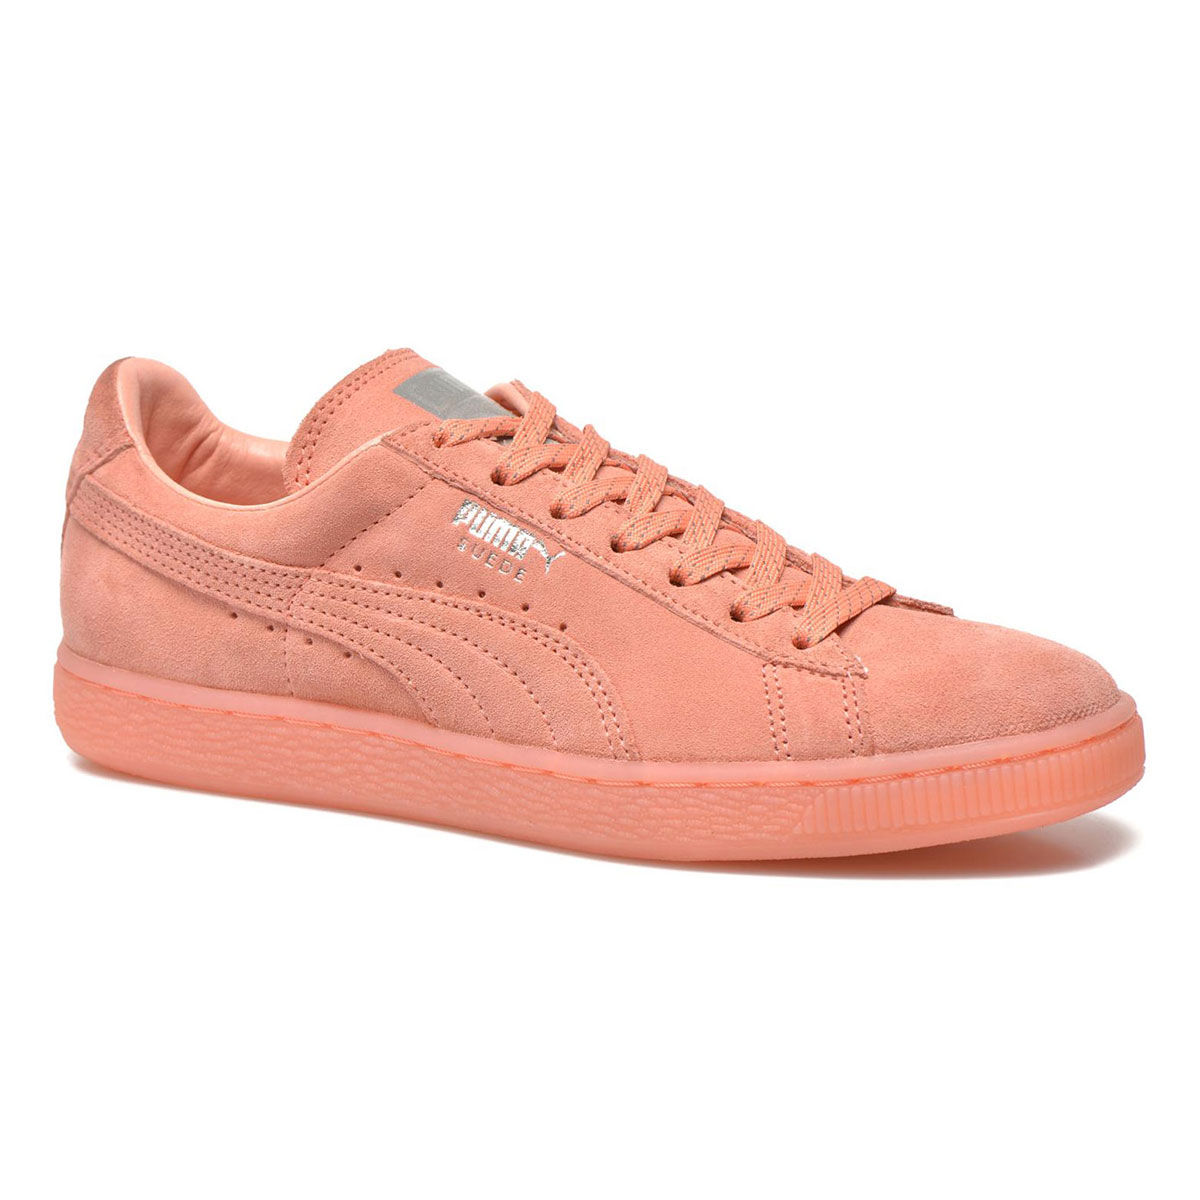 Puma Suede Classic Iced coral  362101-08